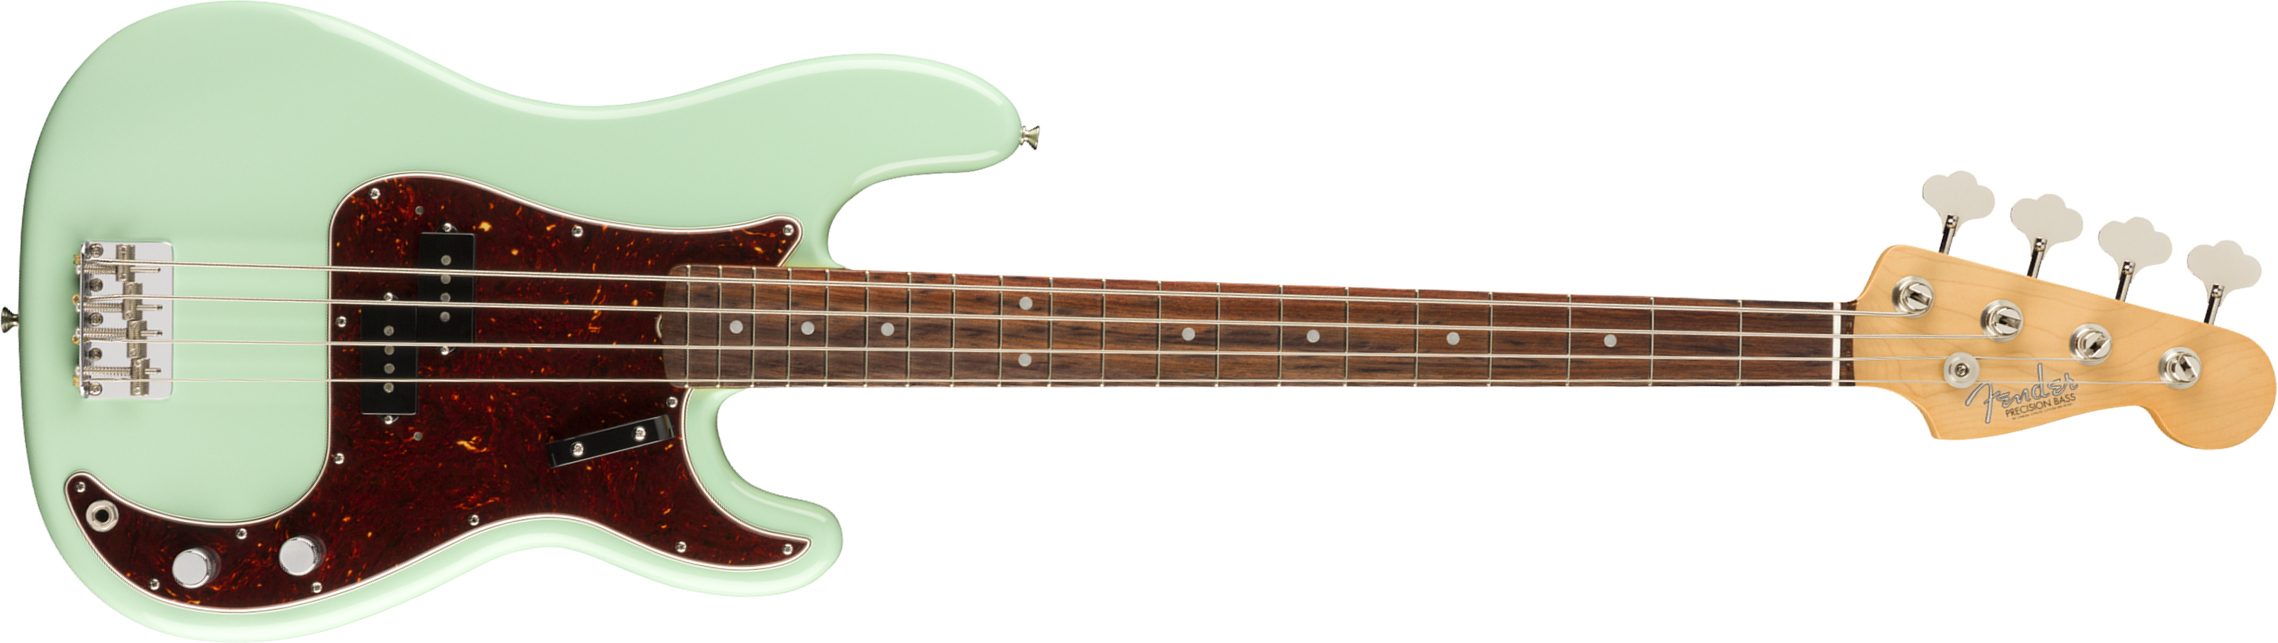 Fender Precision Bass '60s American Original Usa Rw - Surf Green - Basse Électrique Solid Body - Main picture